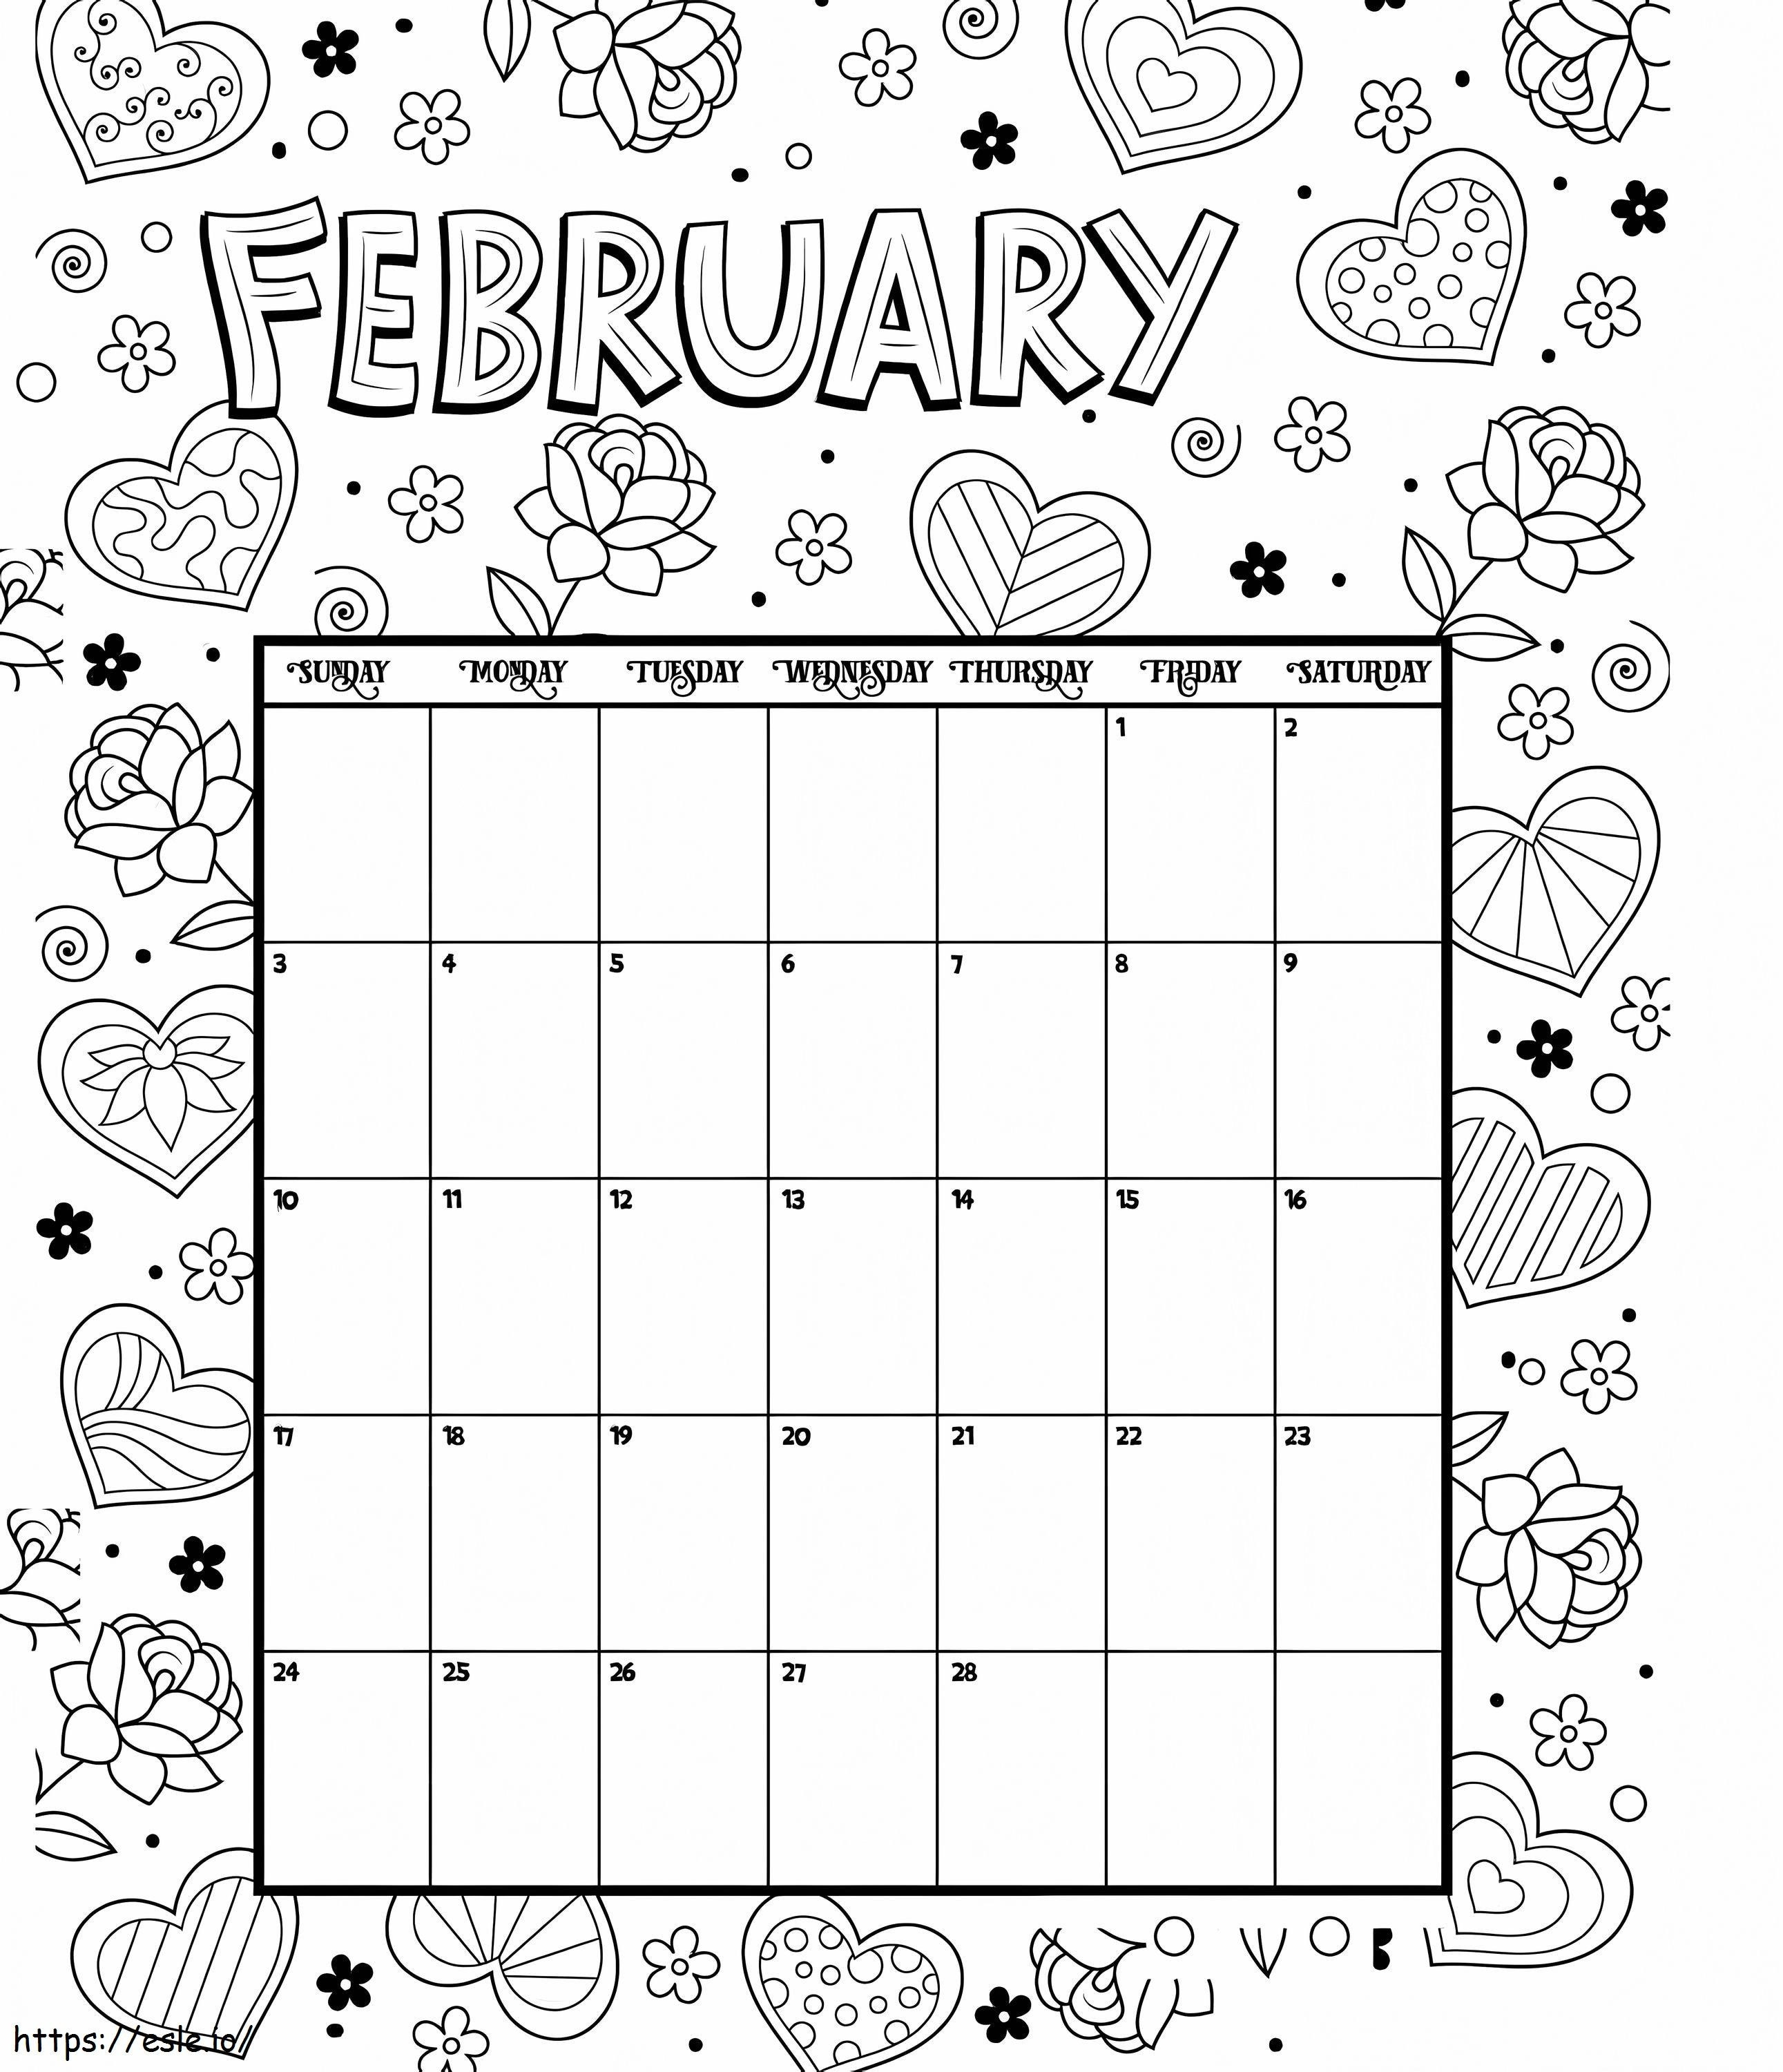 February Calendar coloring page